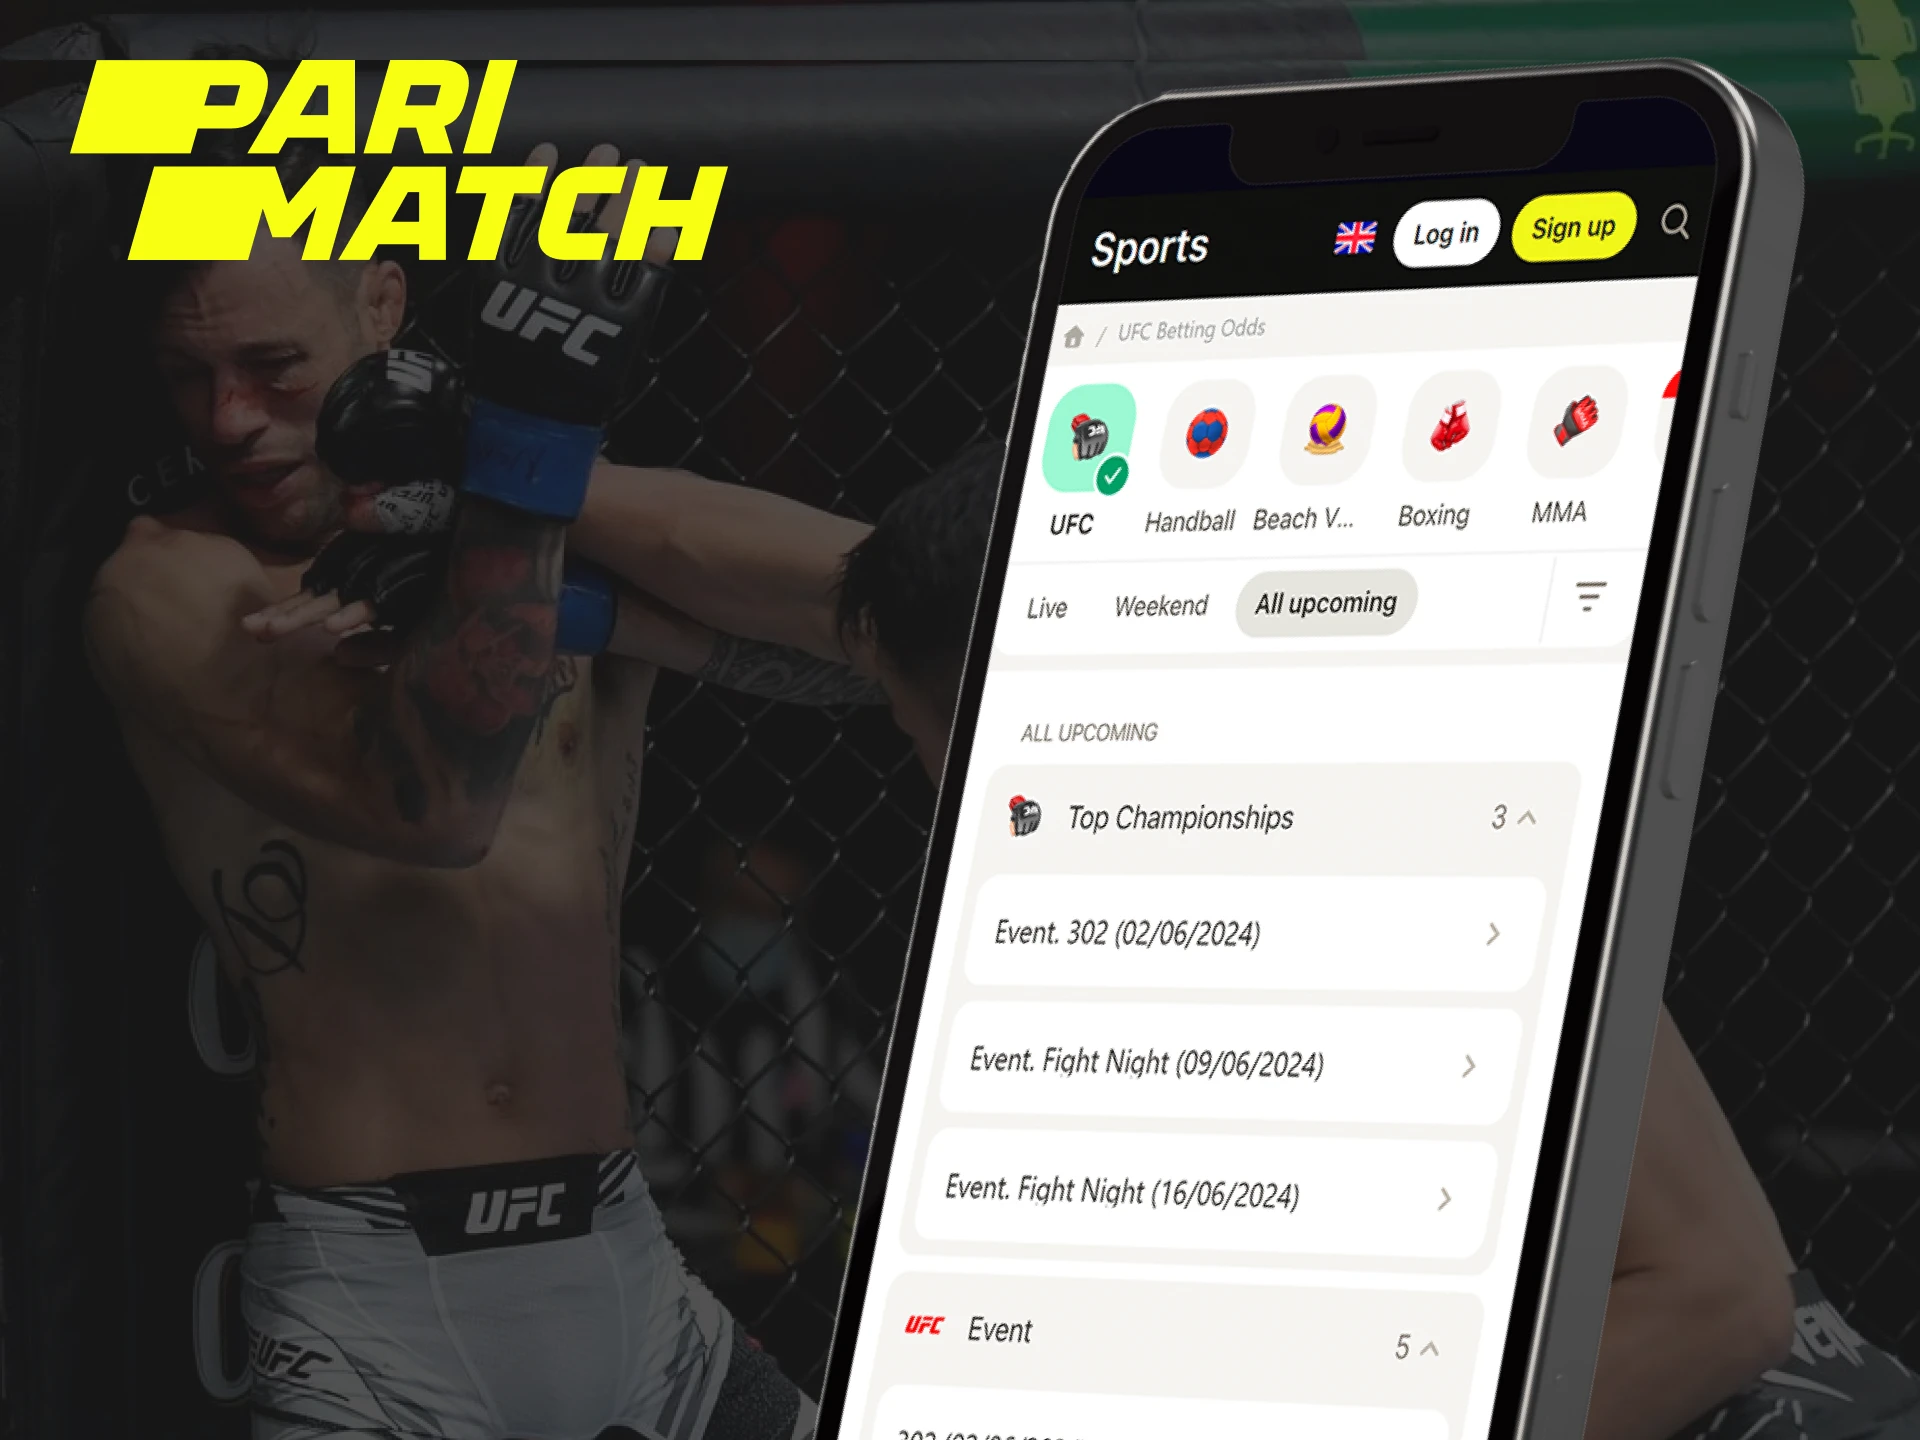 If you like a variety of fighting championships, try betting on the UFC on the Parimatch app.